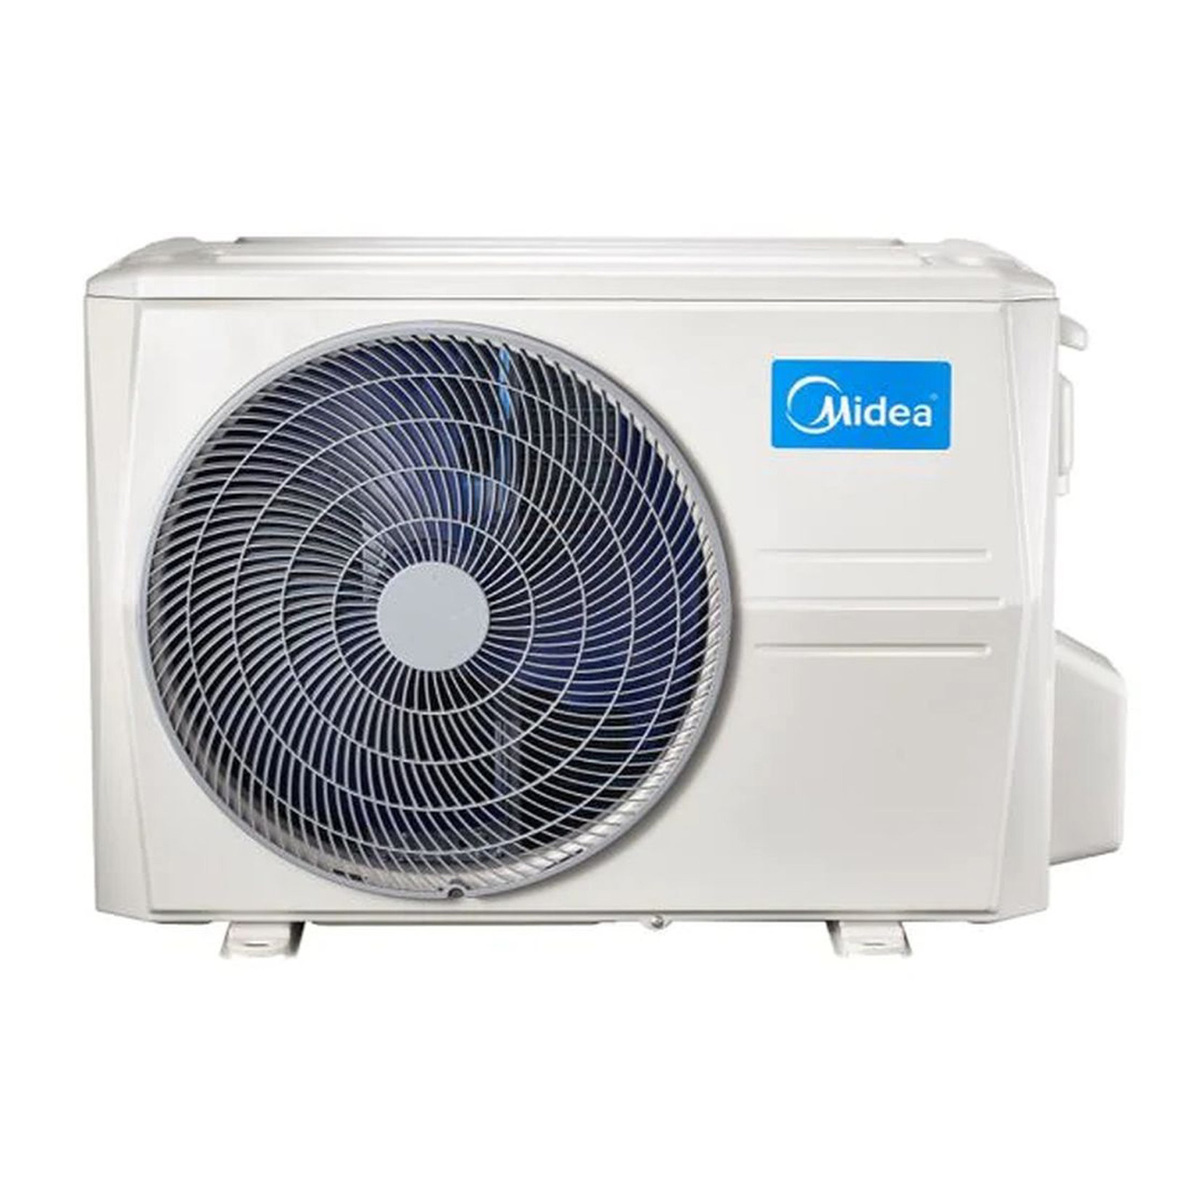 Midea Split Air Conditioner, Rotary Compressor, 2.5 T, 323MST1AG30CRN1H